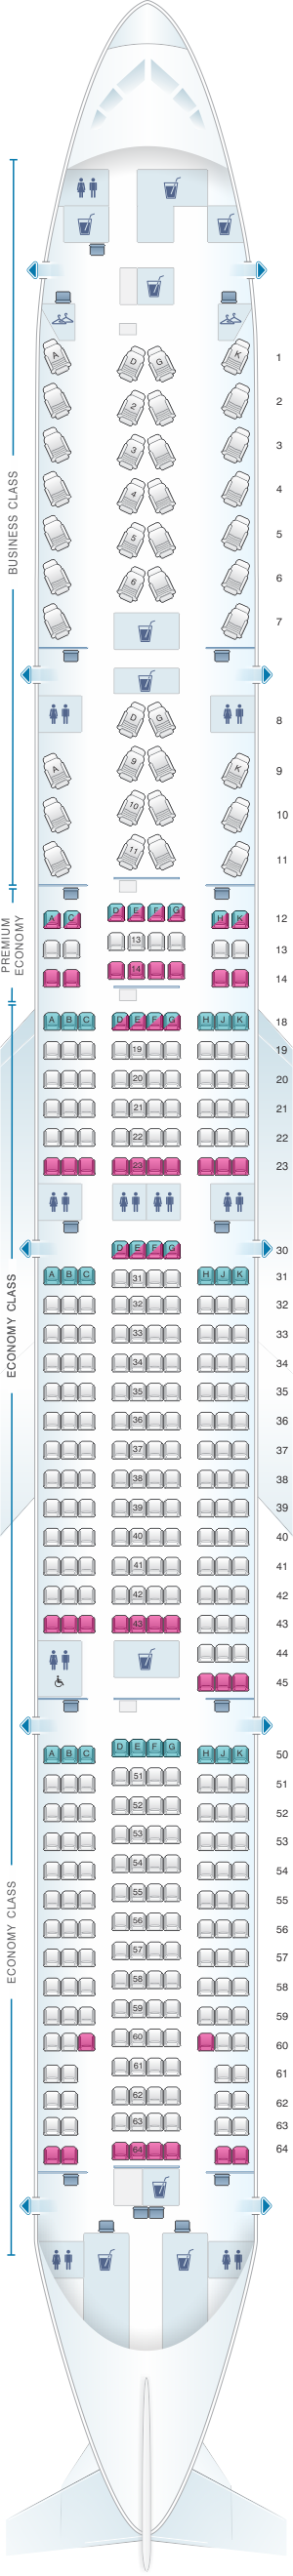 seating boeing 777 wide body